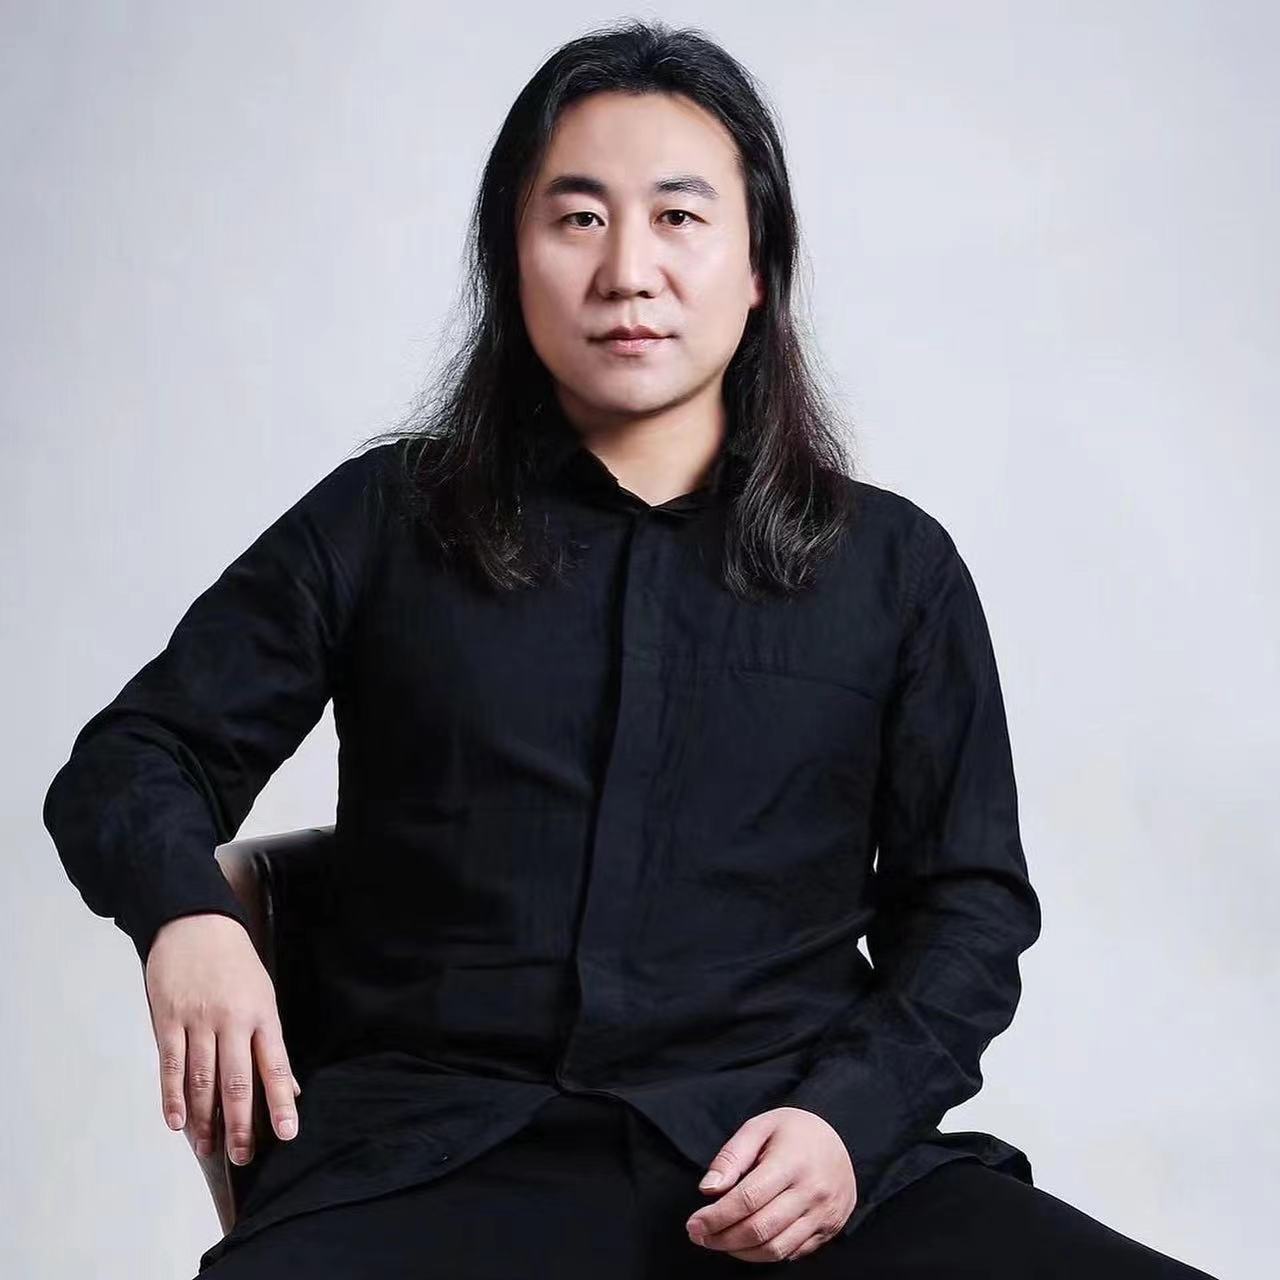 Interview With Sun Jian From SunDesign, China